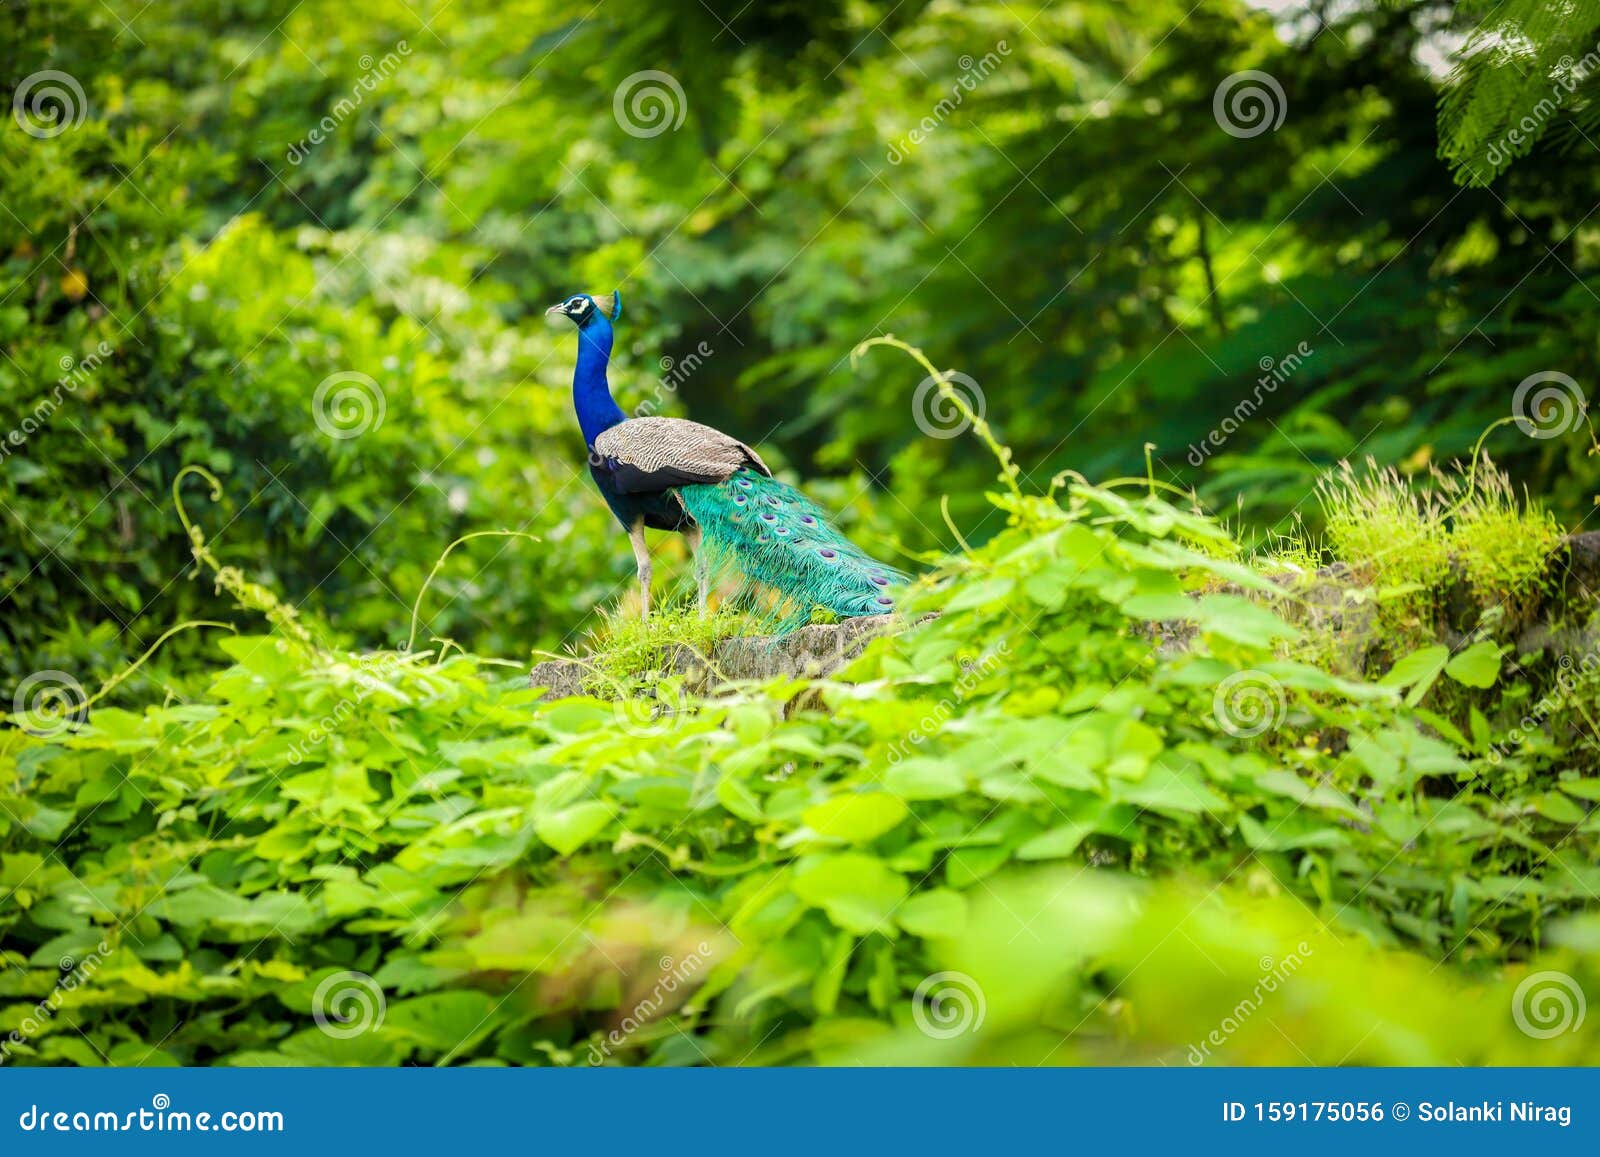 Beautiful Peacock in the Jungle Stock Photo - Image of nature ...